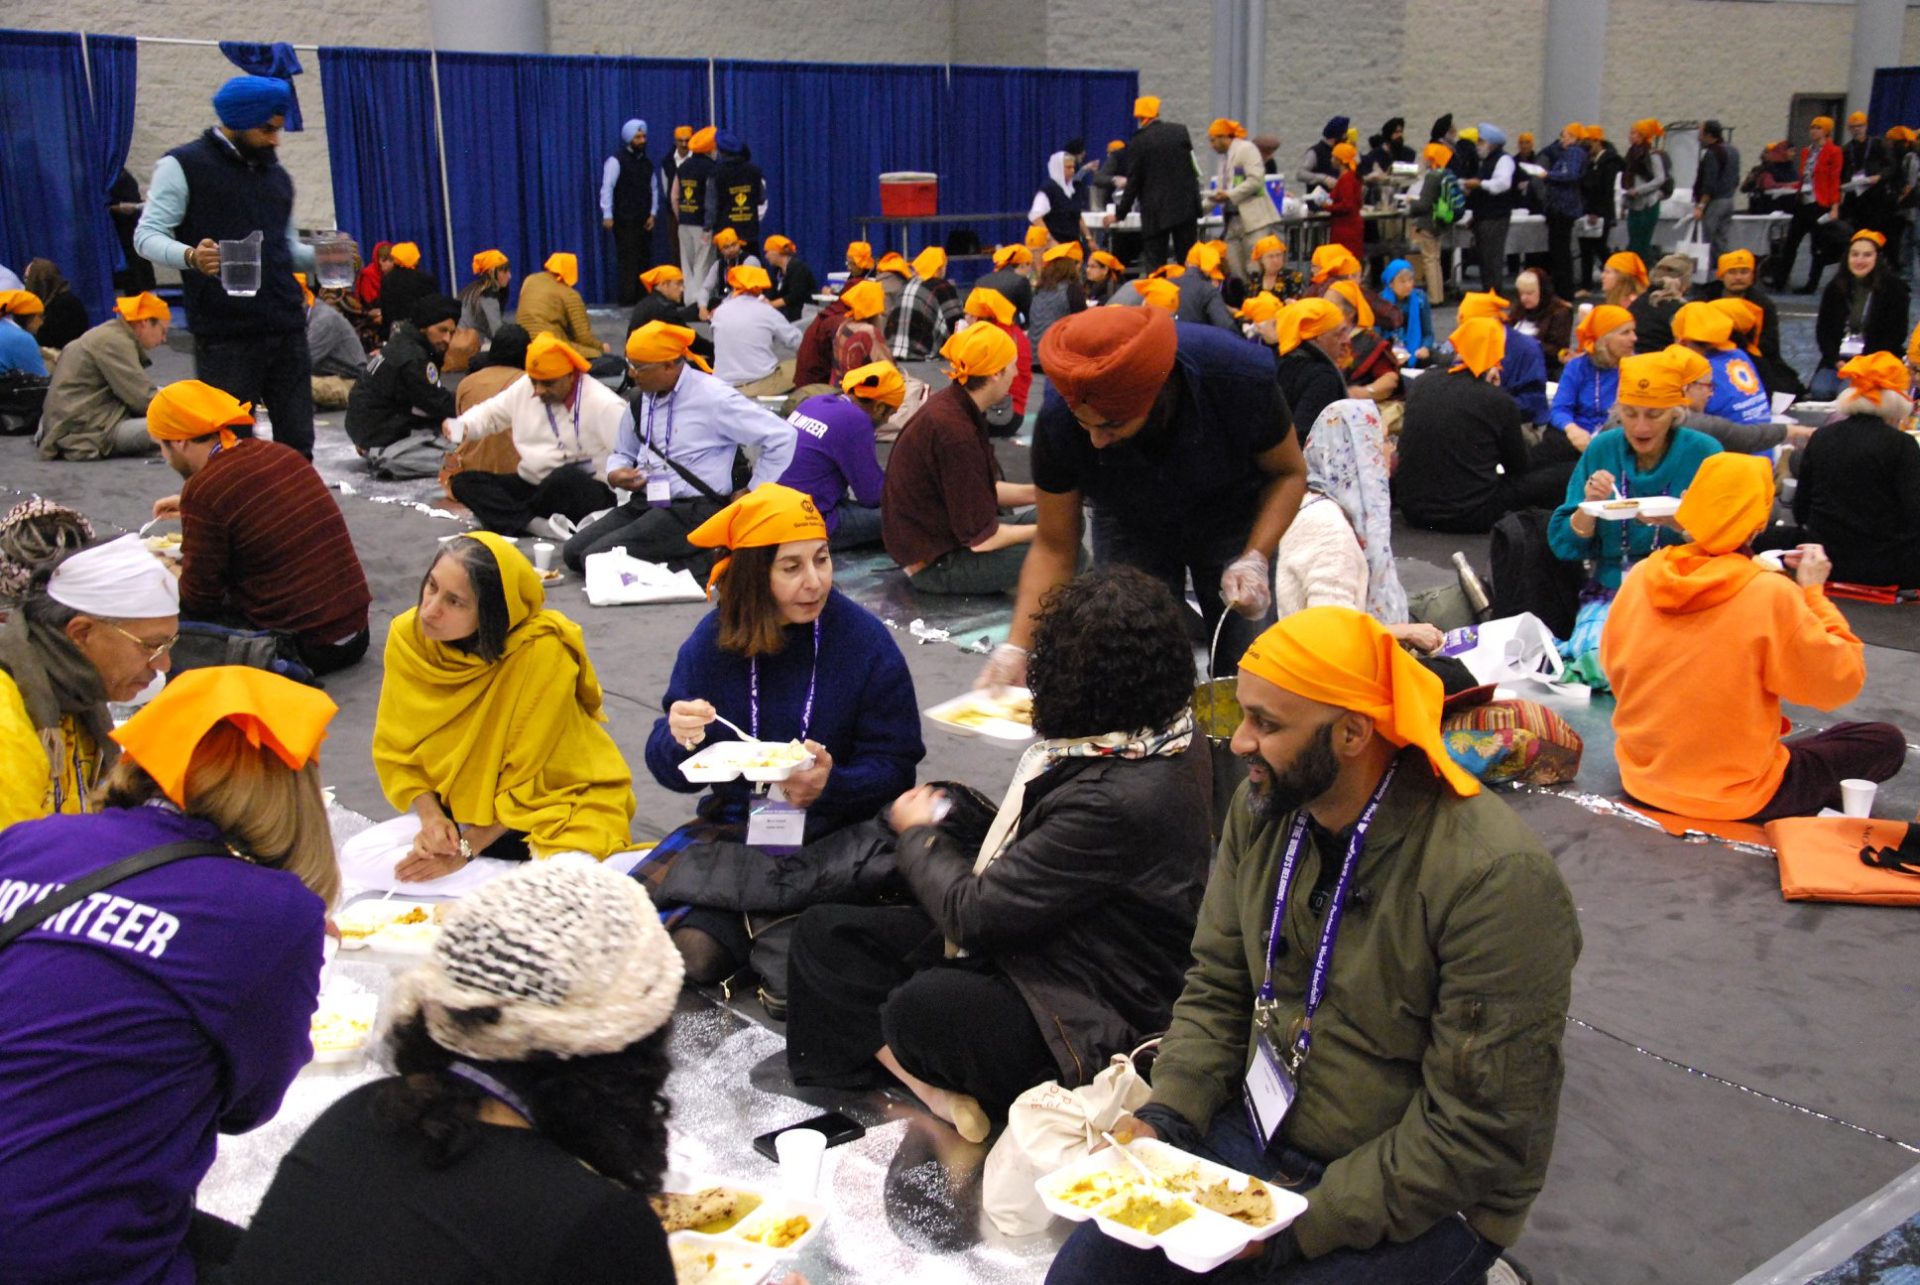 Attendees at the Parliament of the World's Religions conference enjoy a simple langar lunch prepared by Toronto's Sikh community. (Photo: Will Pearson)